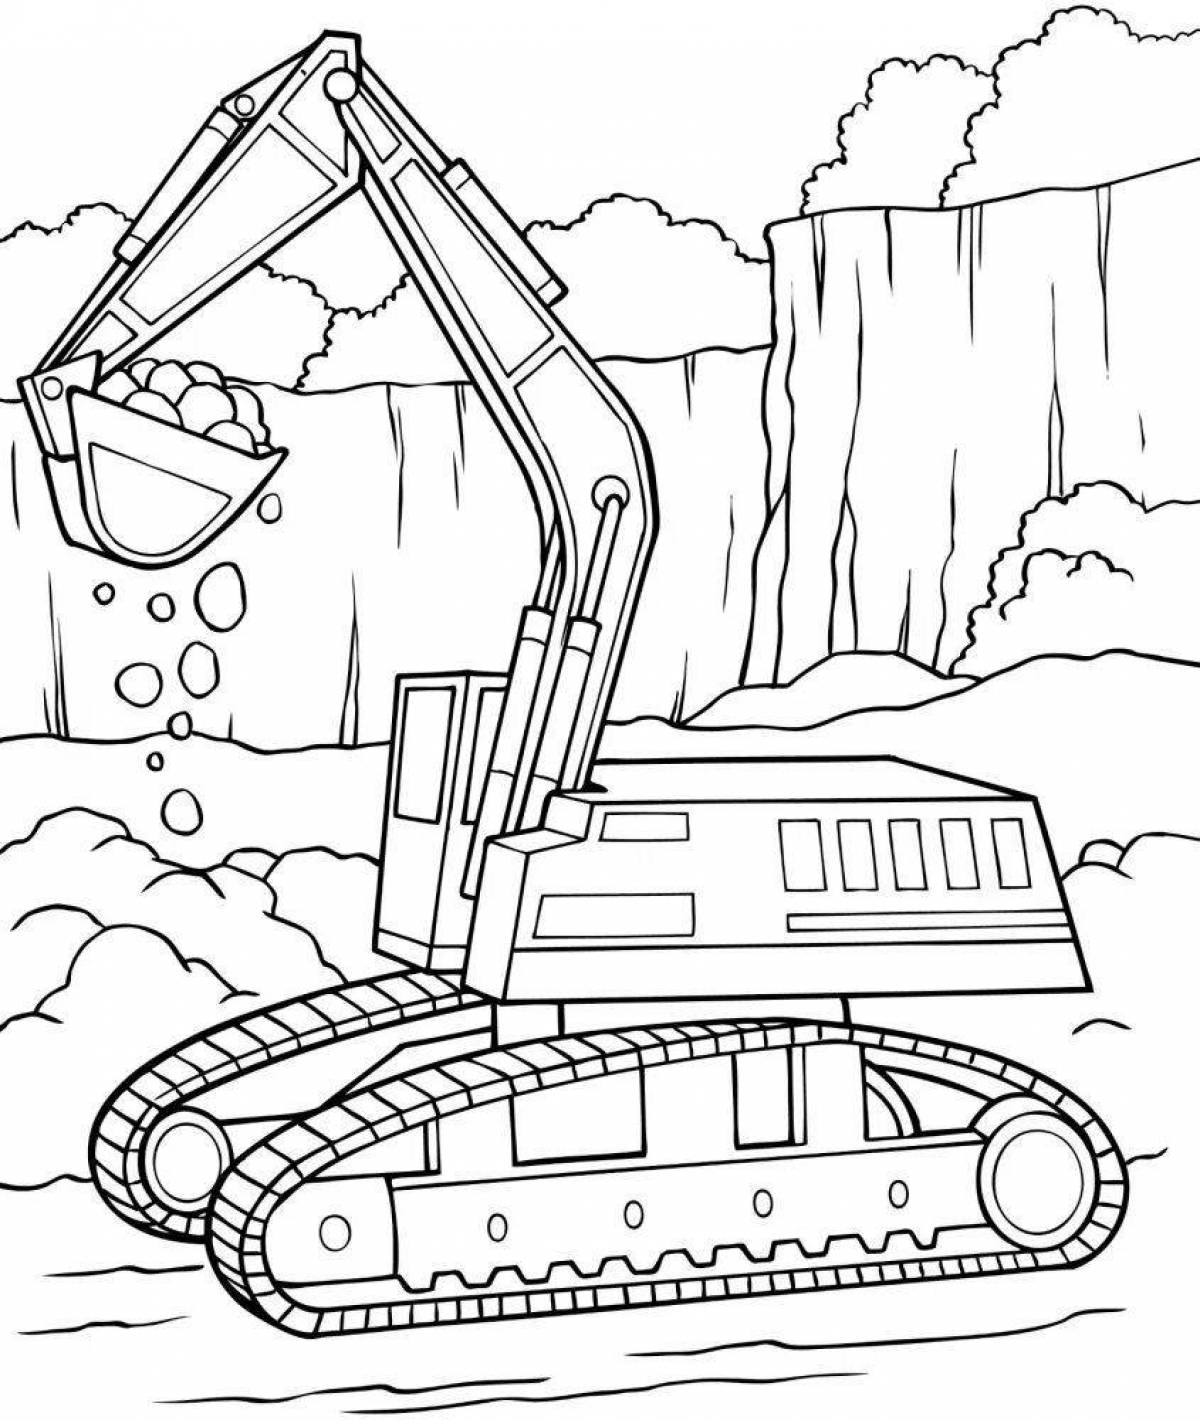 Innovative robot tractor coloring page